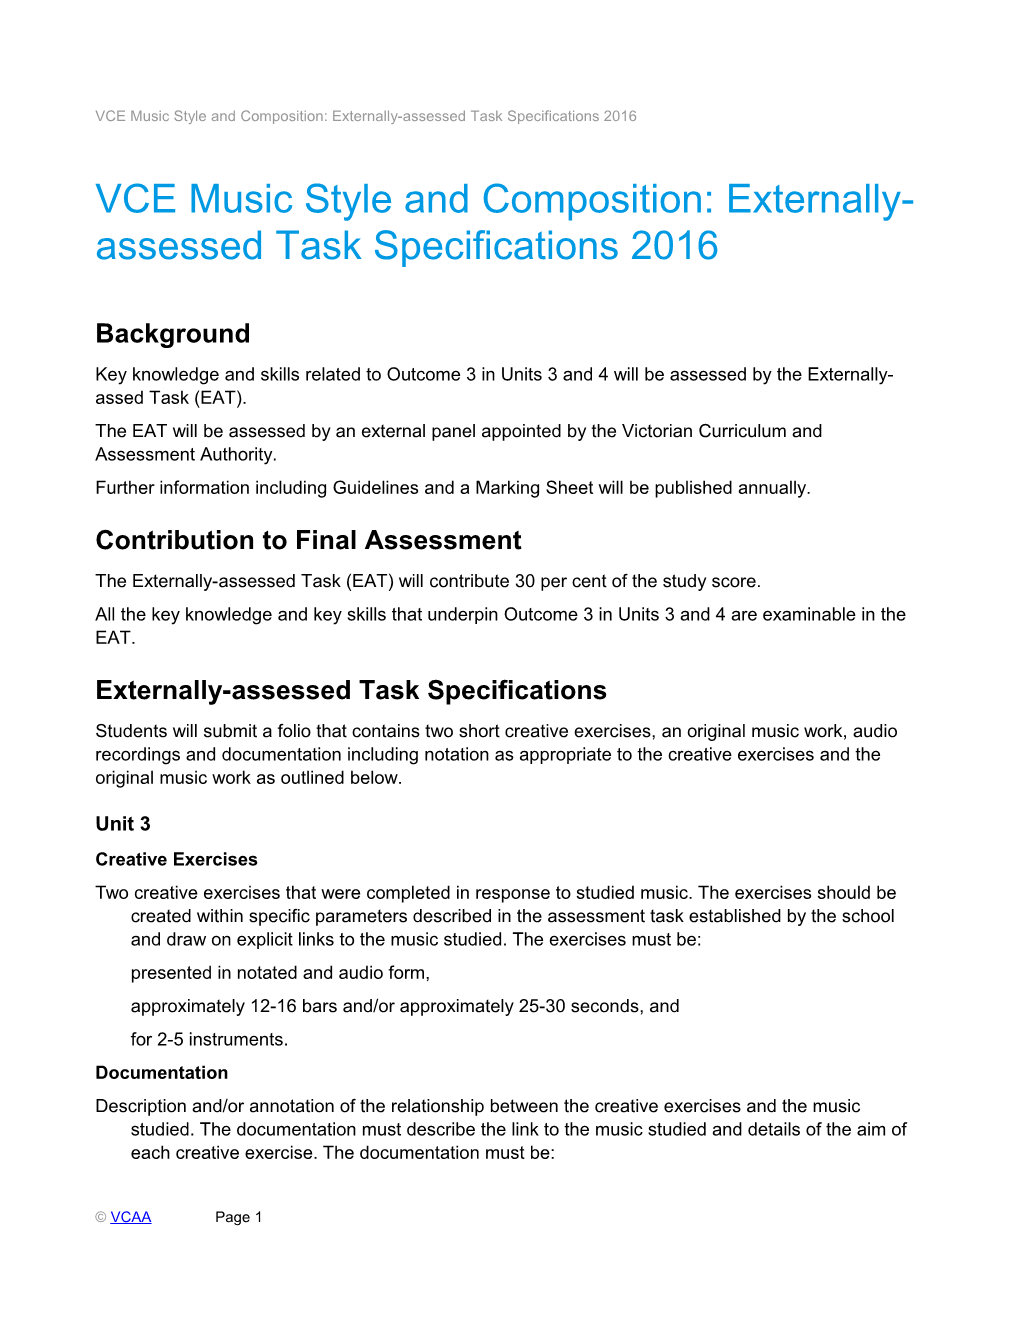 VCE Music Style and Composition: Externally-Assessed Task Specifications 2016